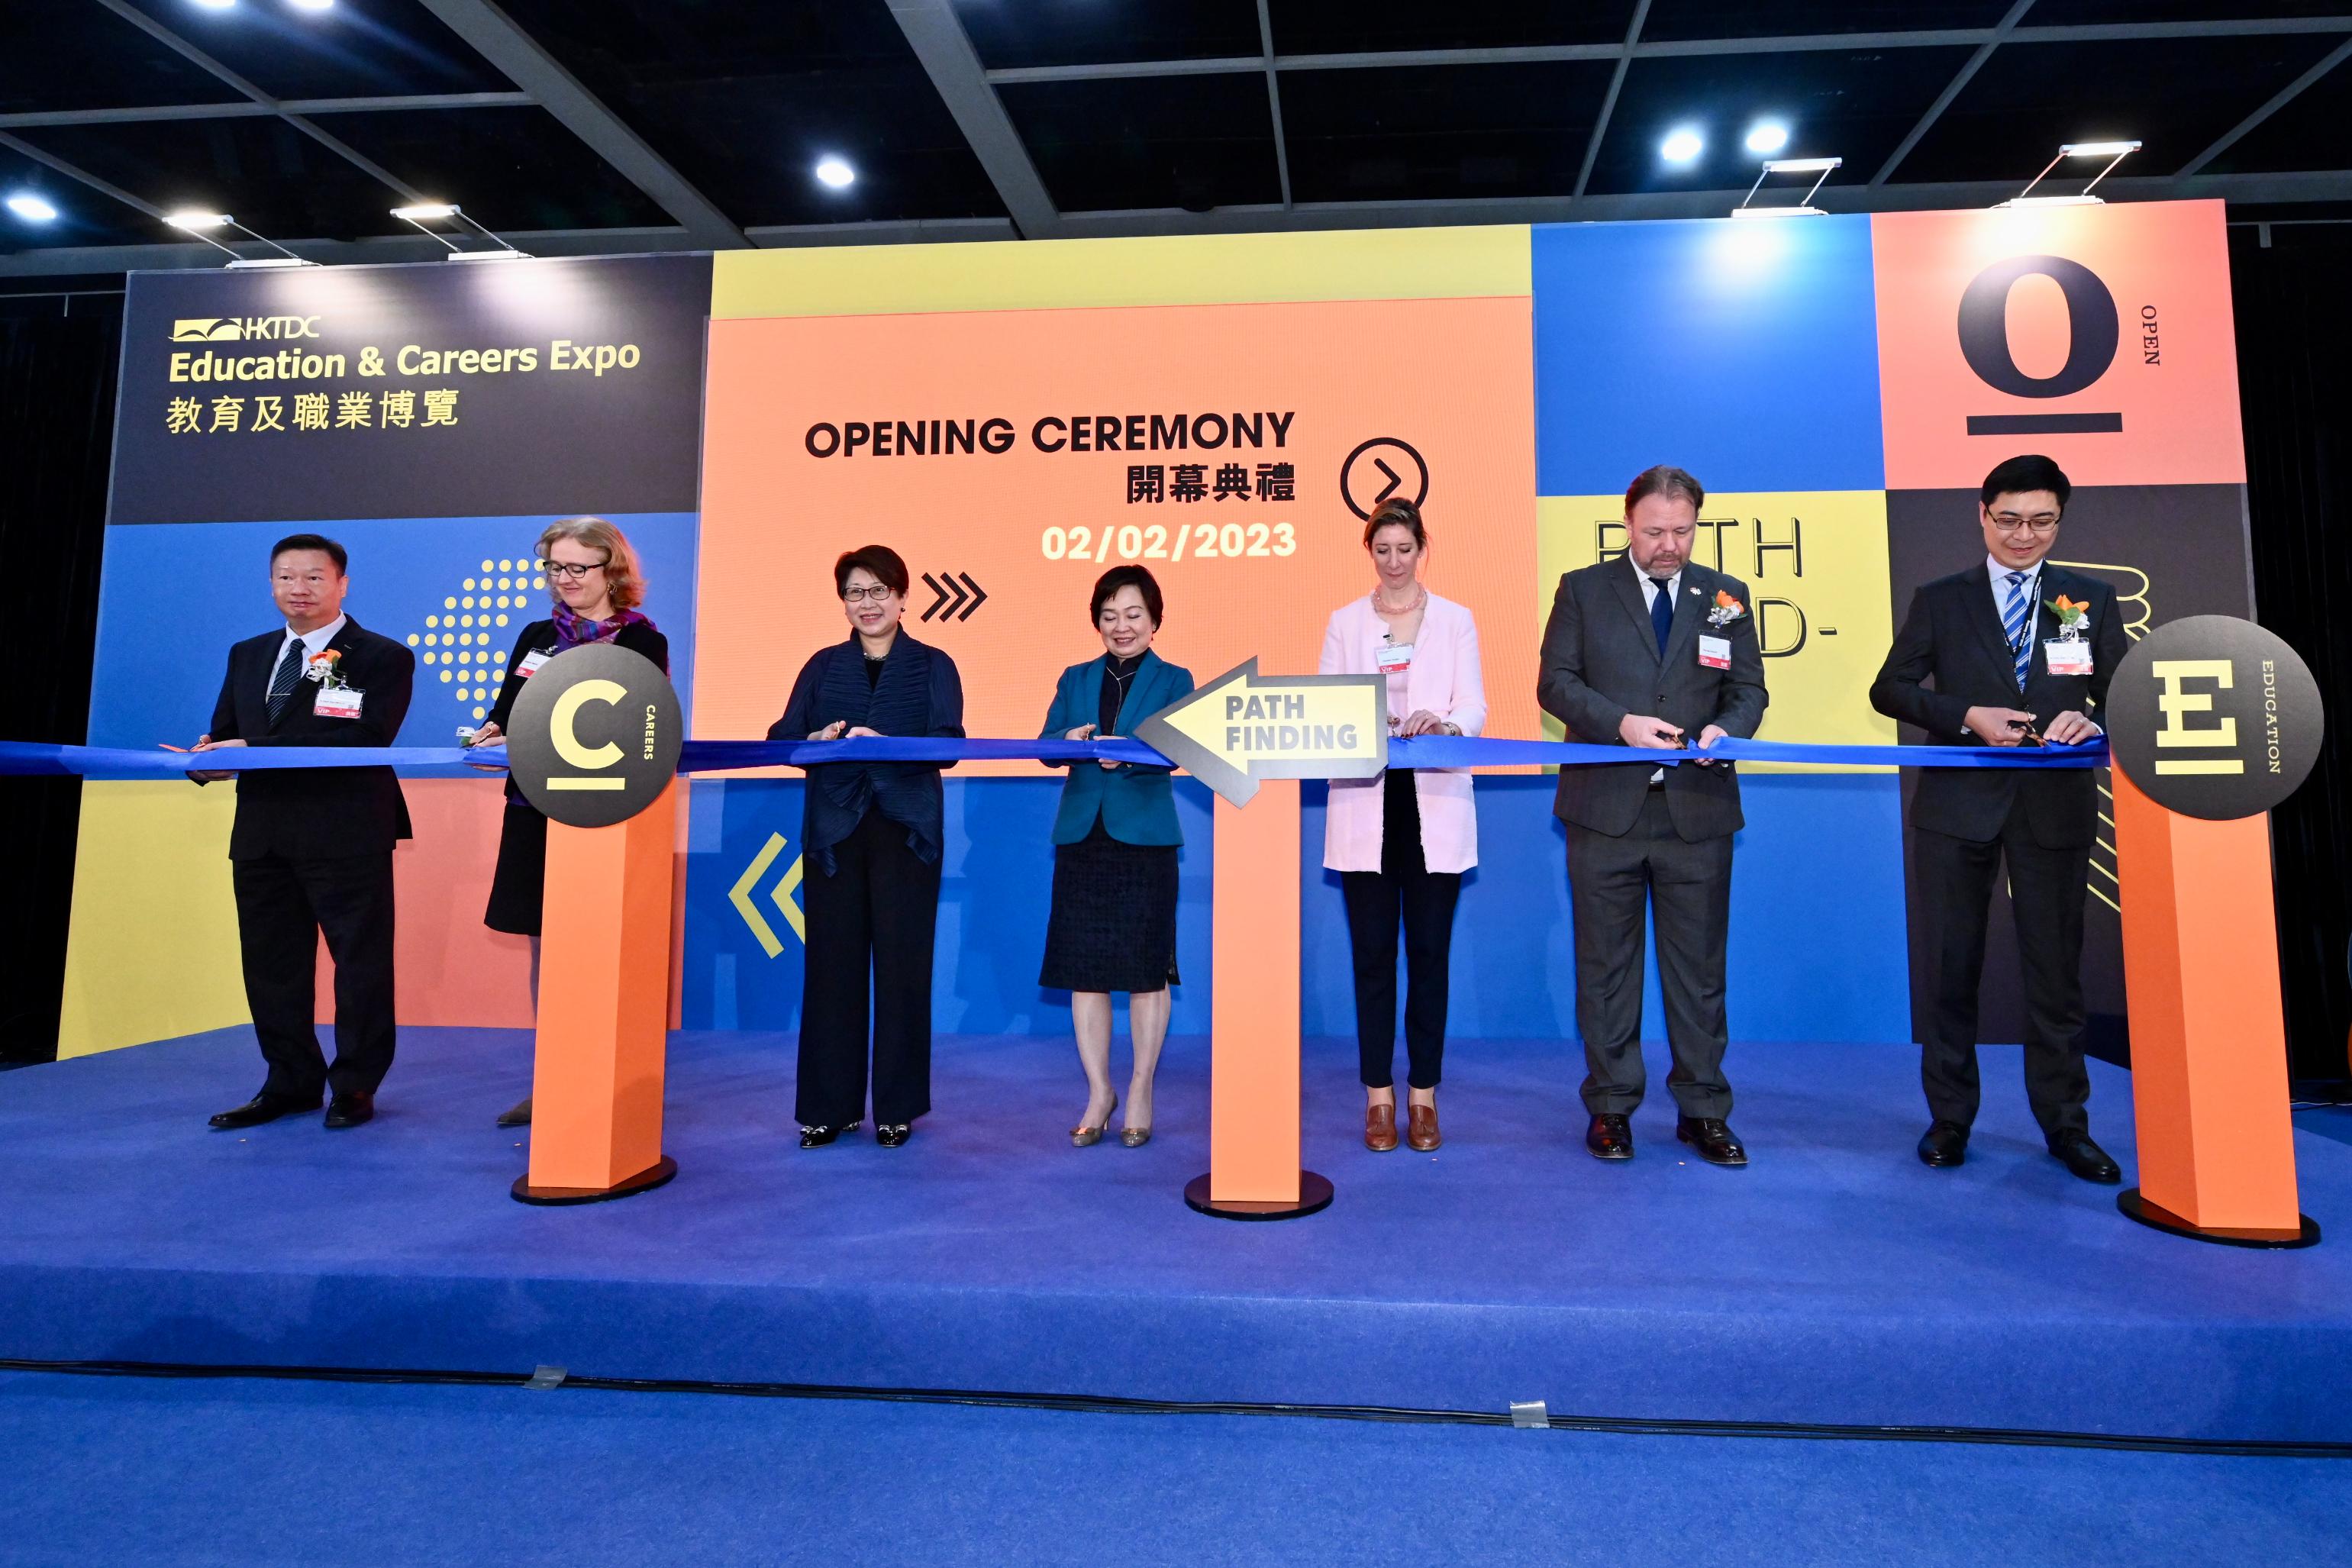 The Secretary for Education, Dr Choi Yuk-lin (centre), officiates at the opening ceremony of the Education & Careers Expo 2023 with other guests today (February 2).